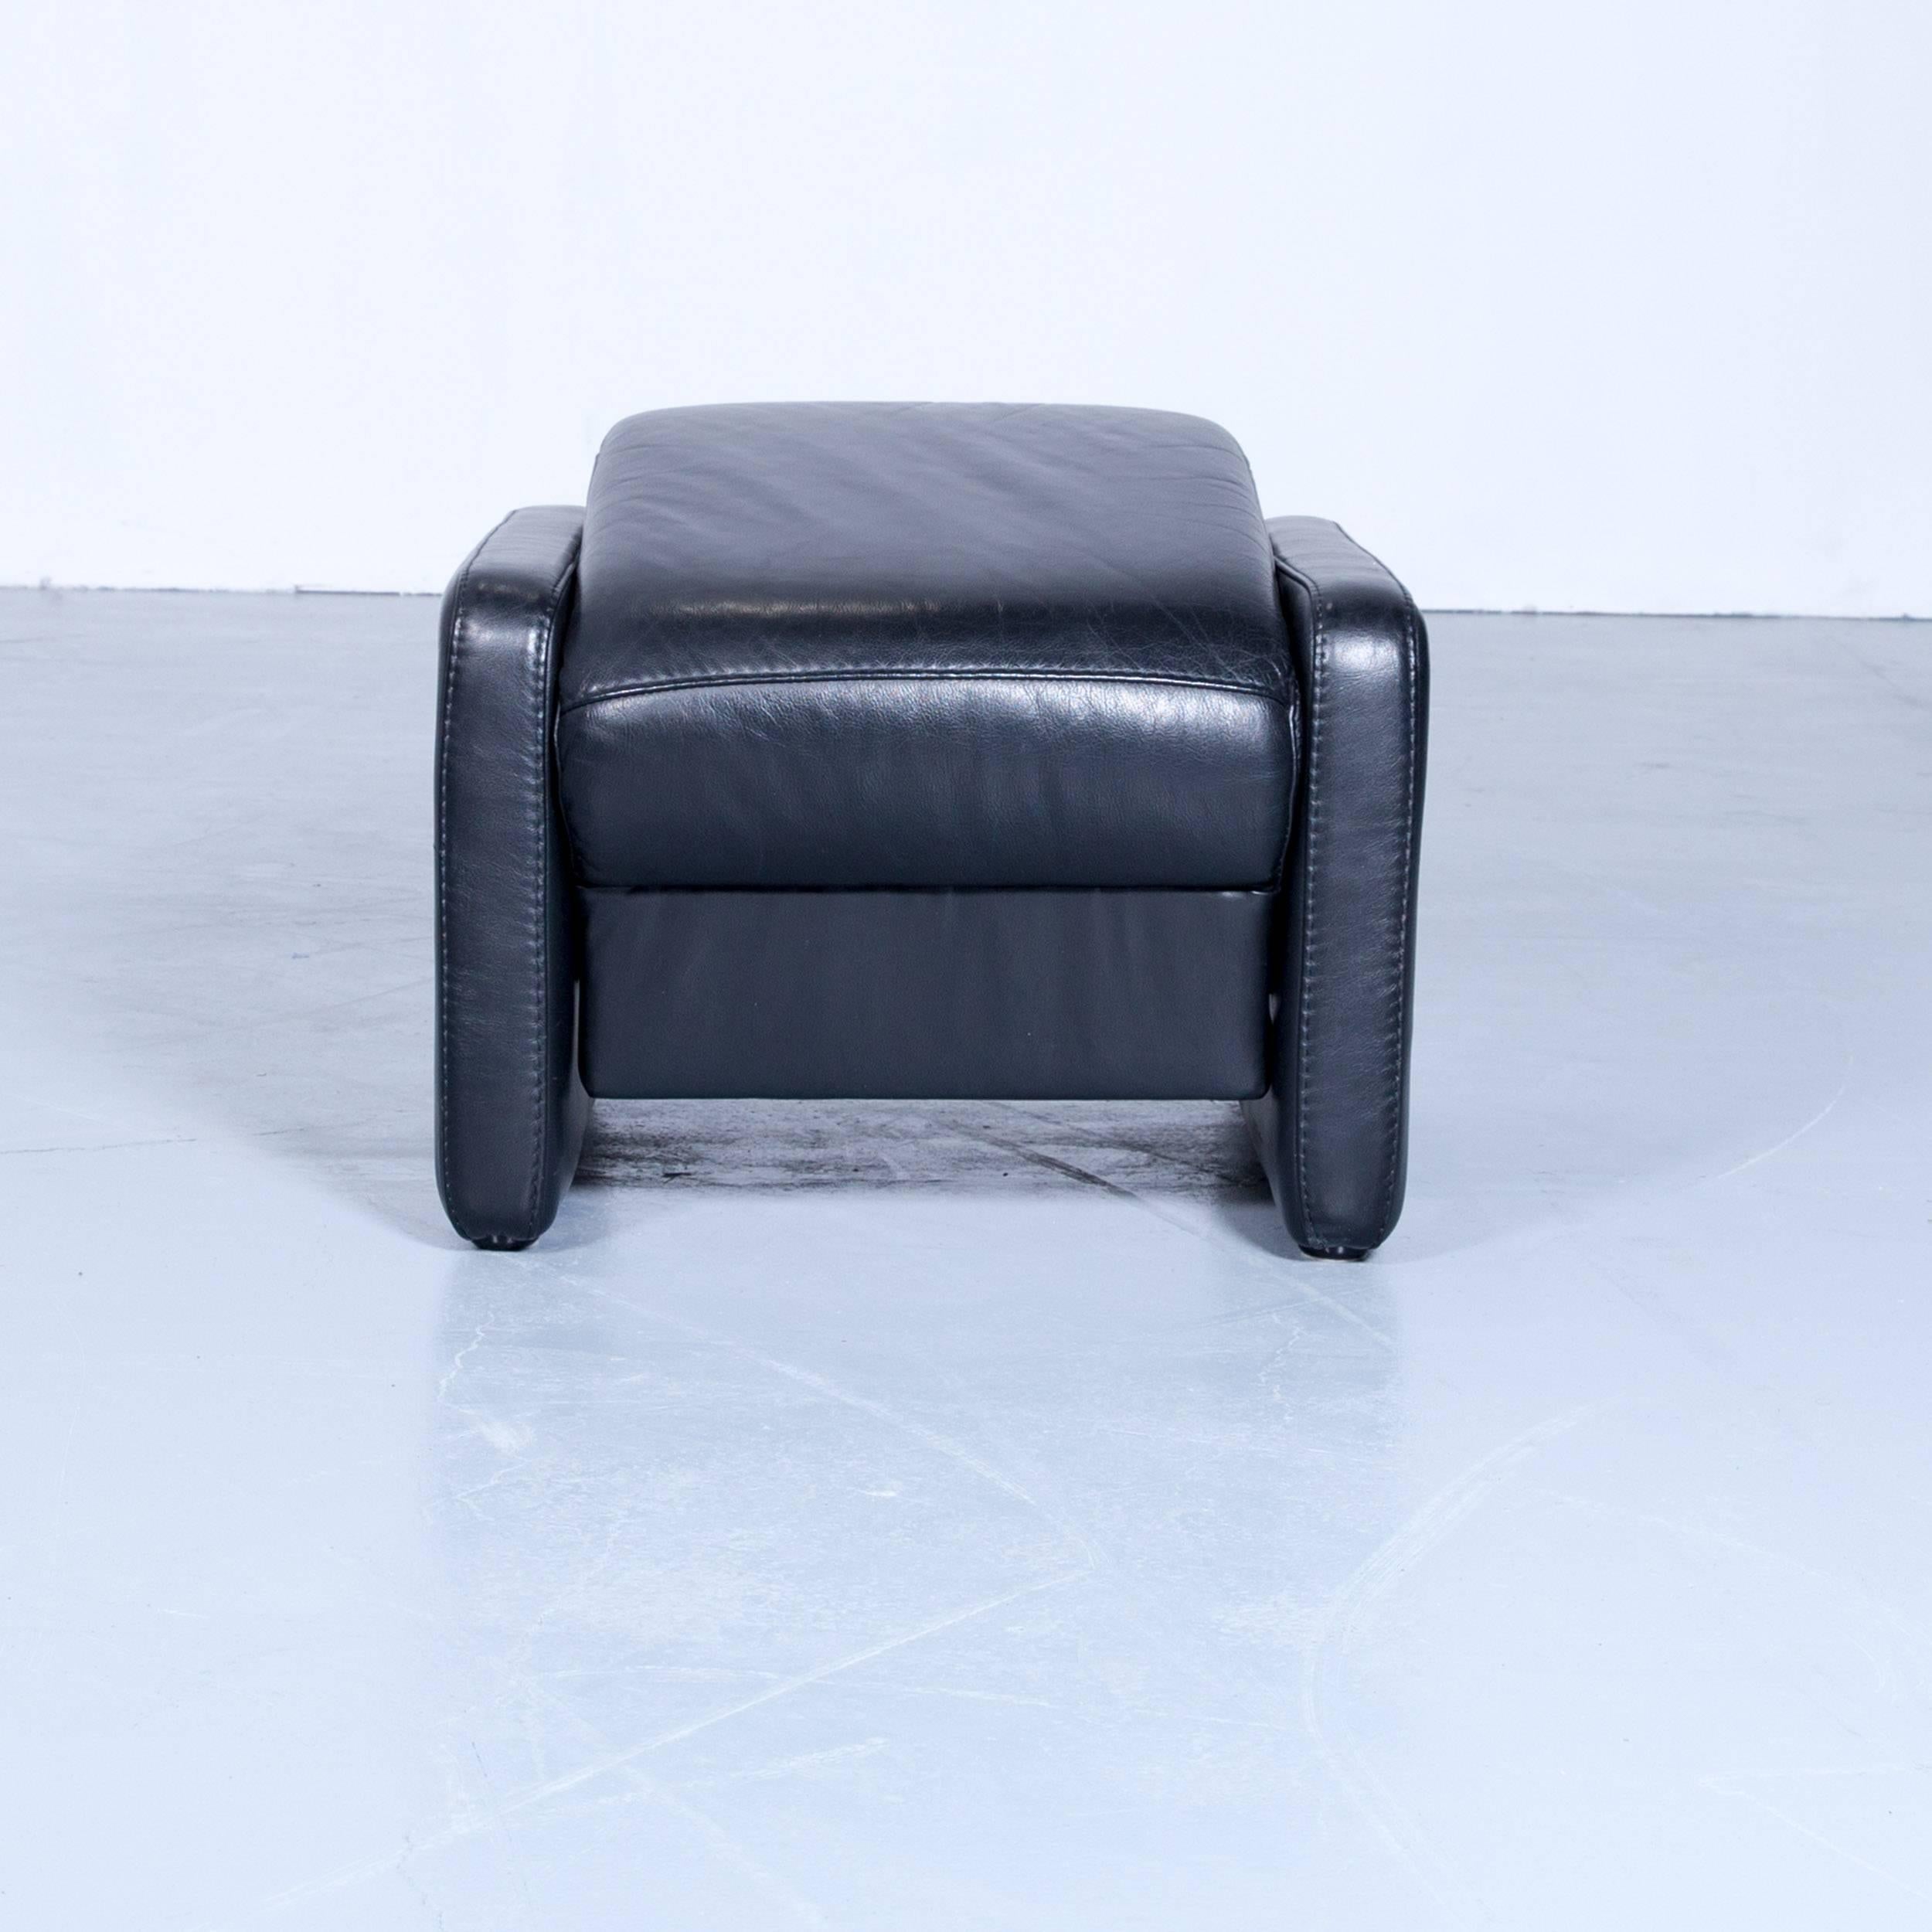 Designer Chair Set Black Leather Relax Function Footstool Pouf Couch Modern 3